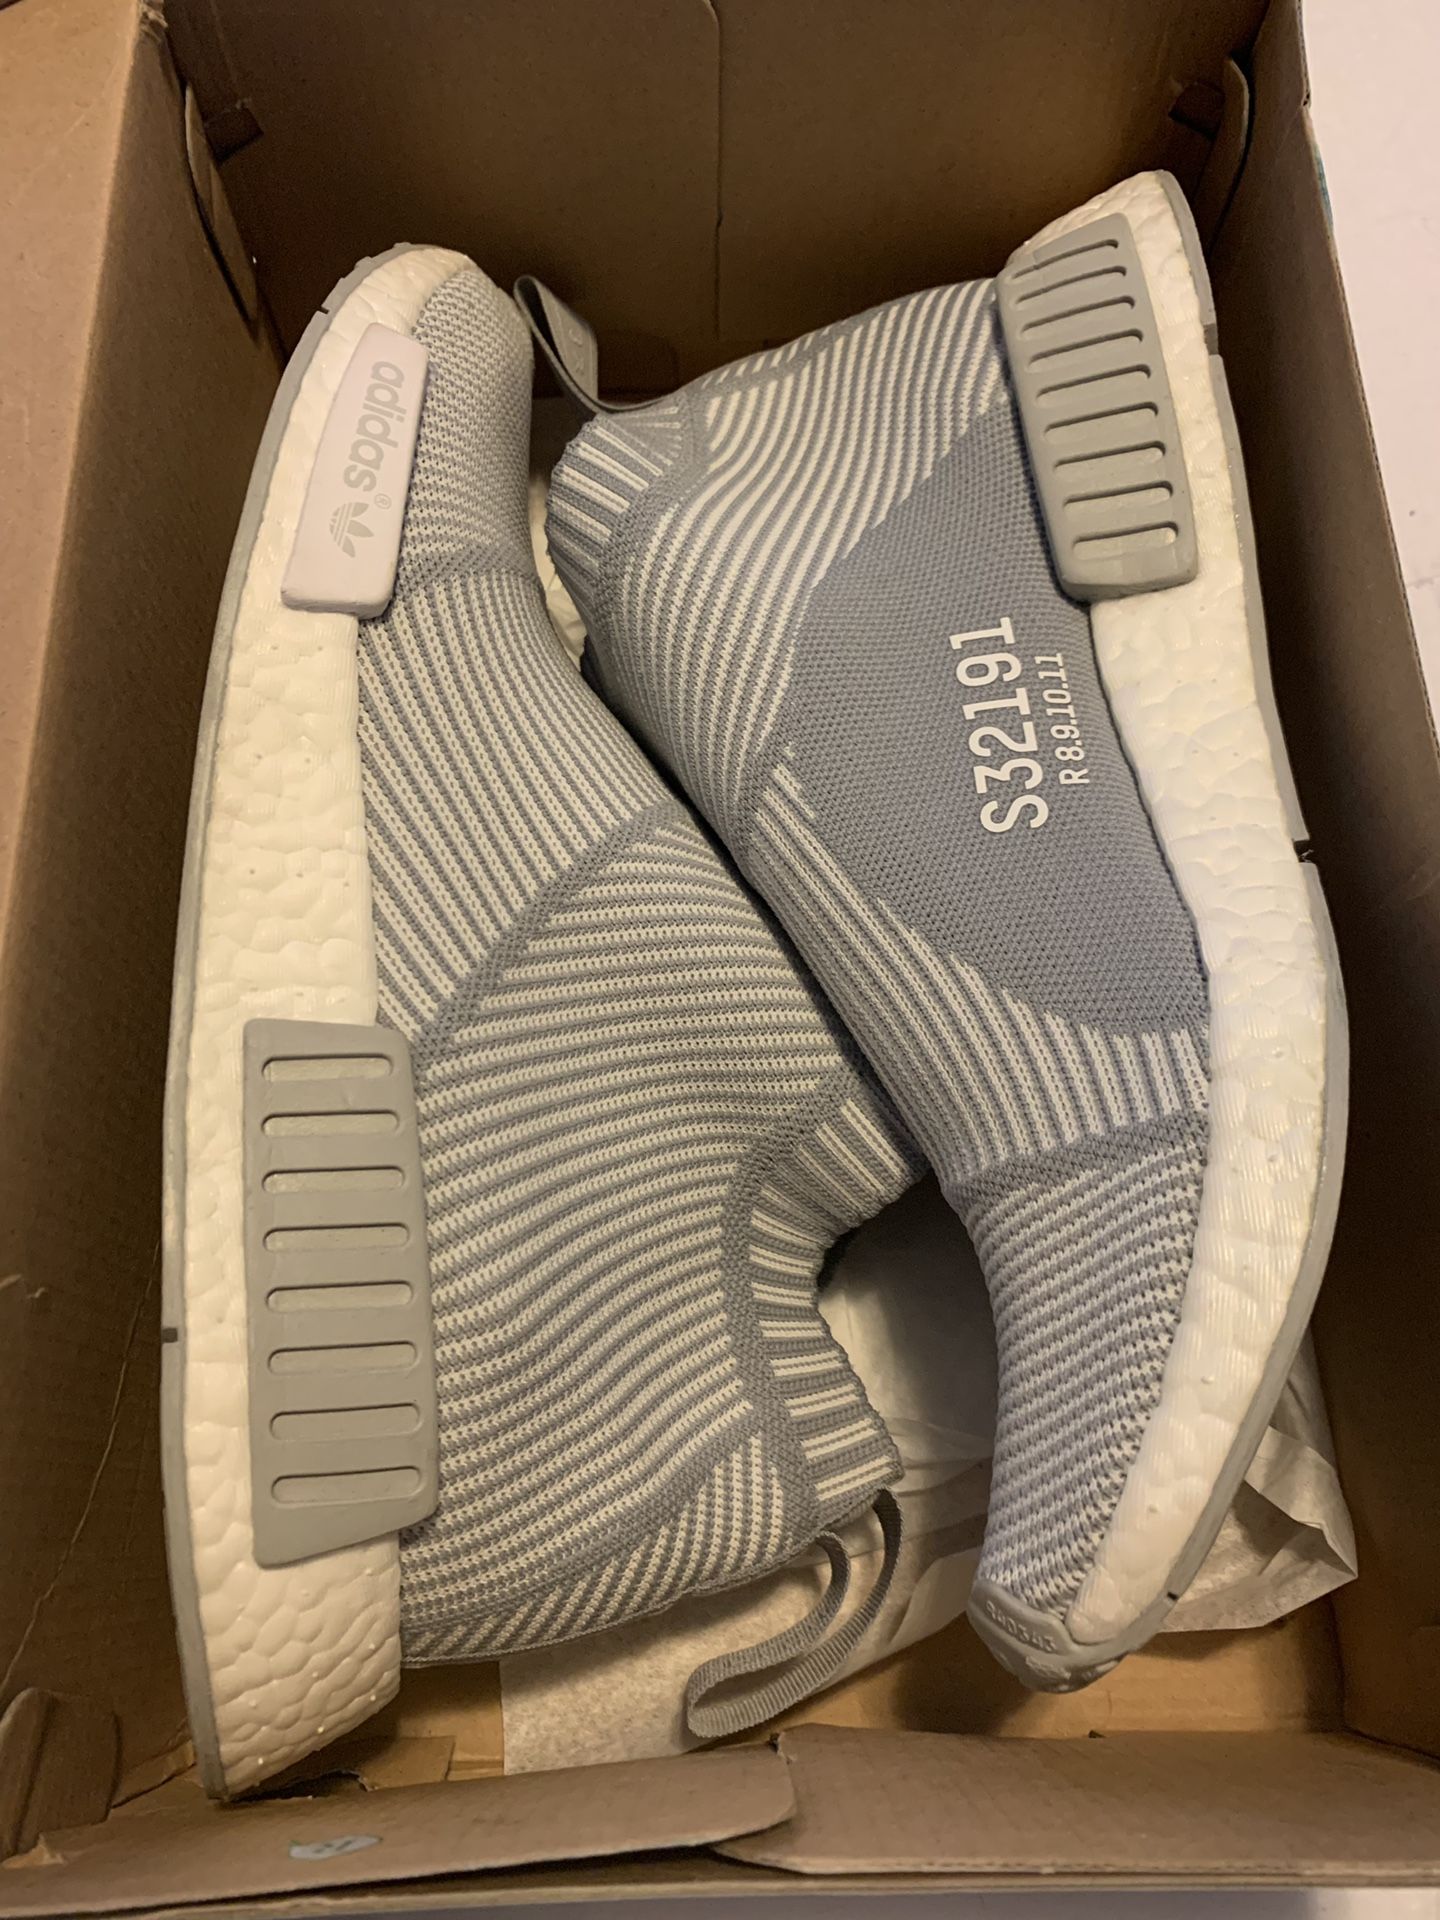 Adidas NMD City Socks size 10.5 and 11 worn once!